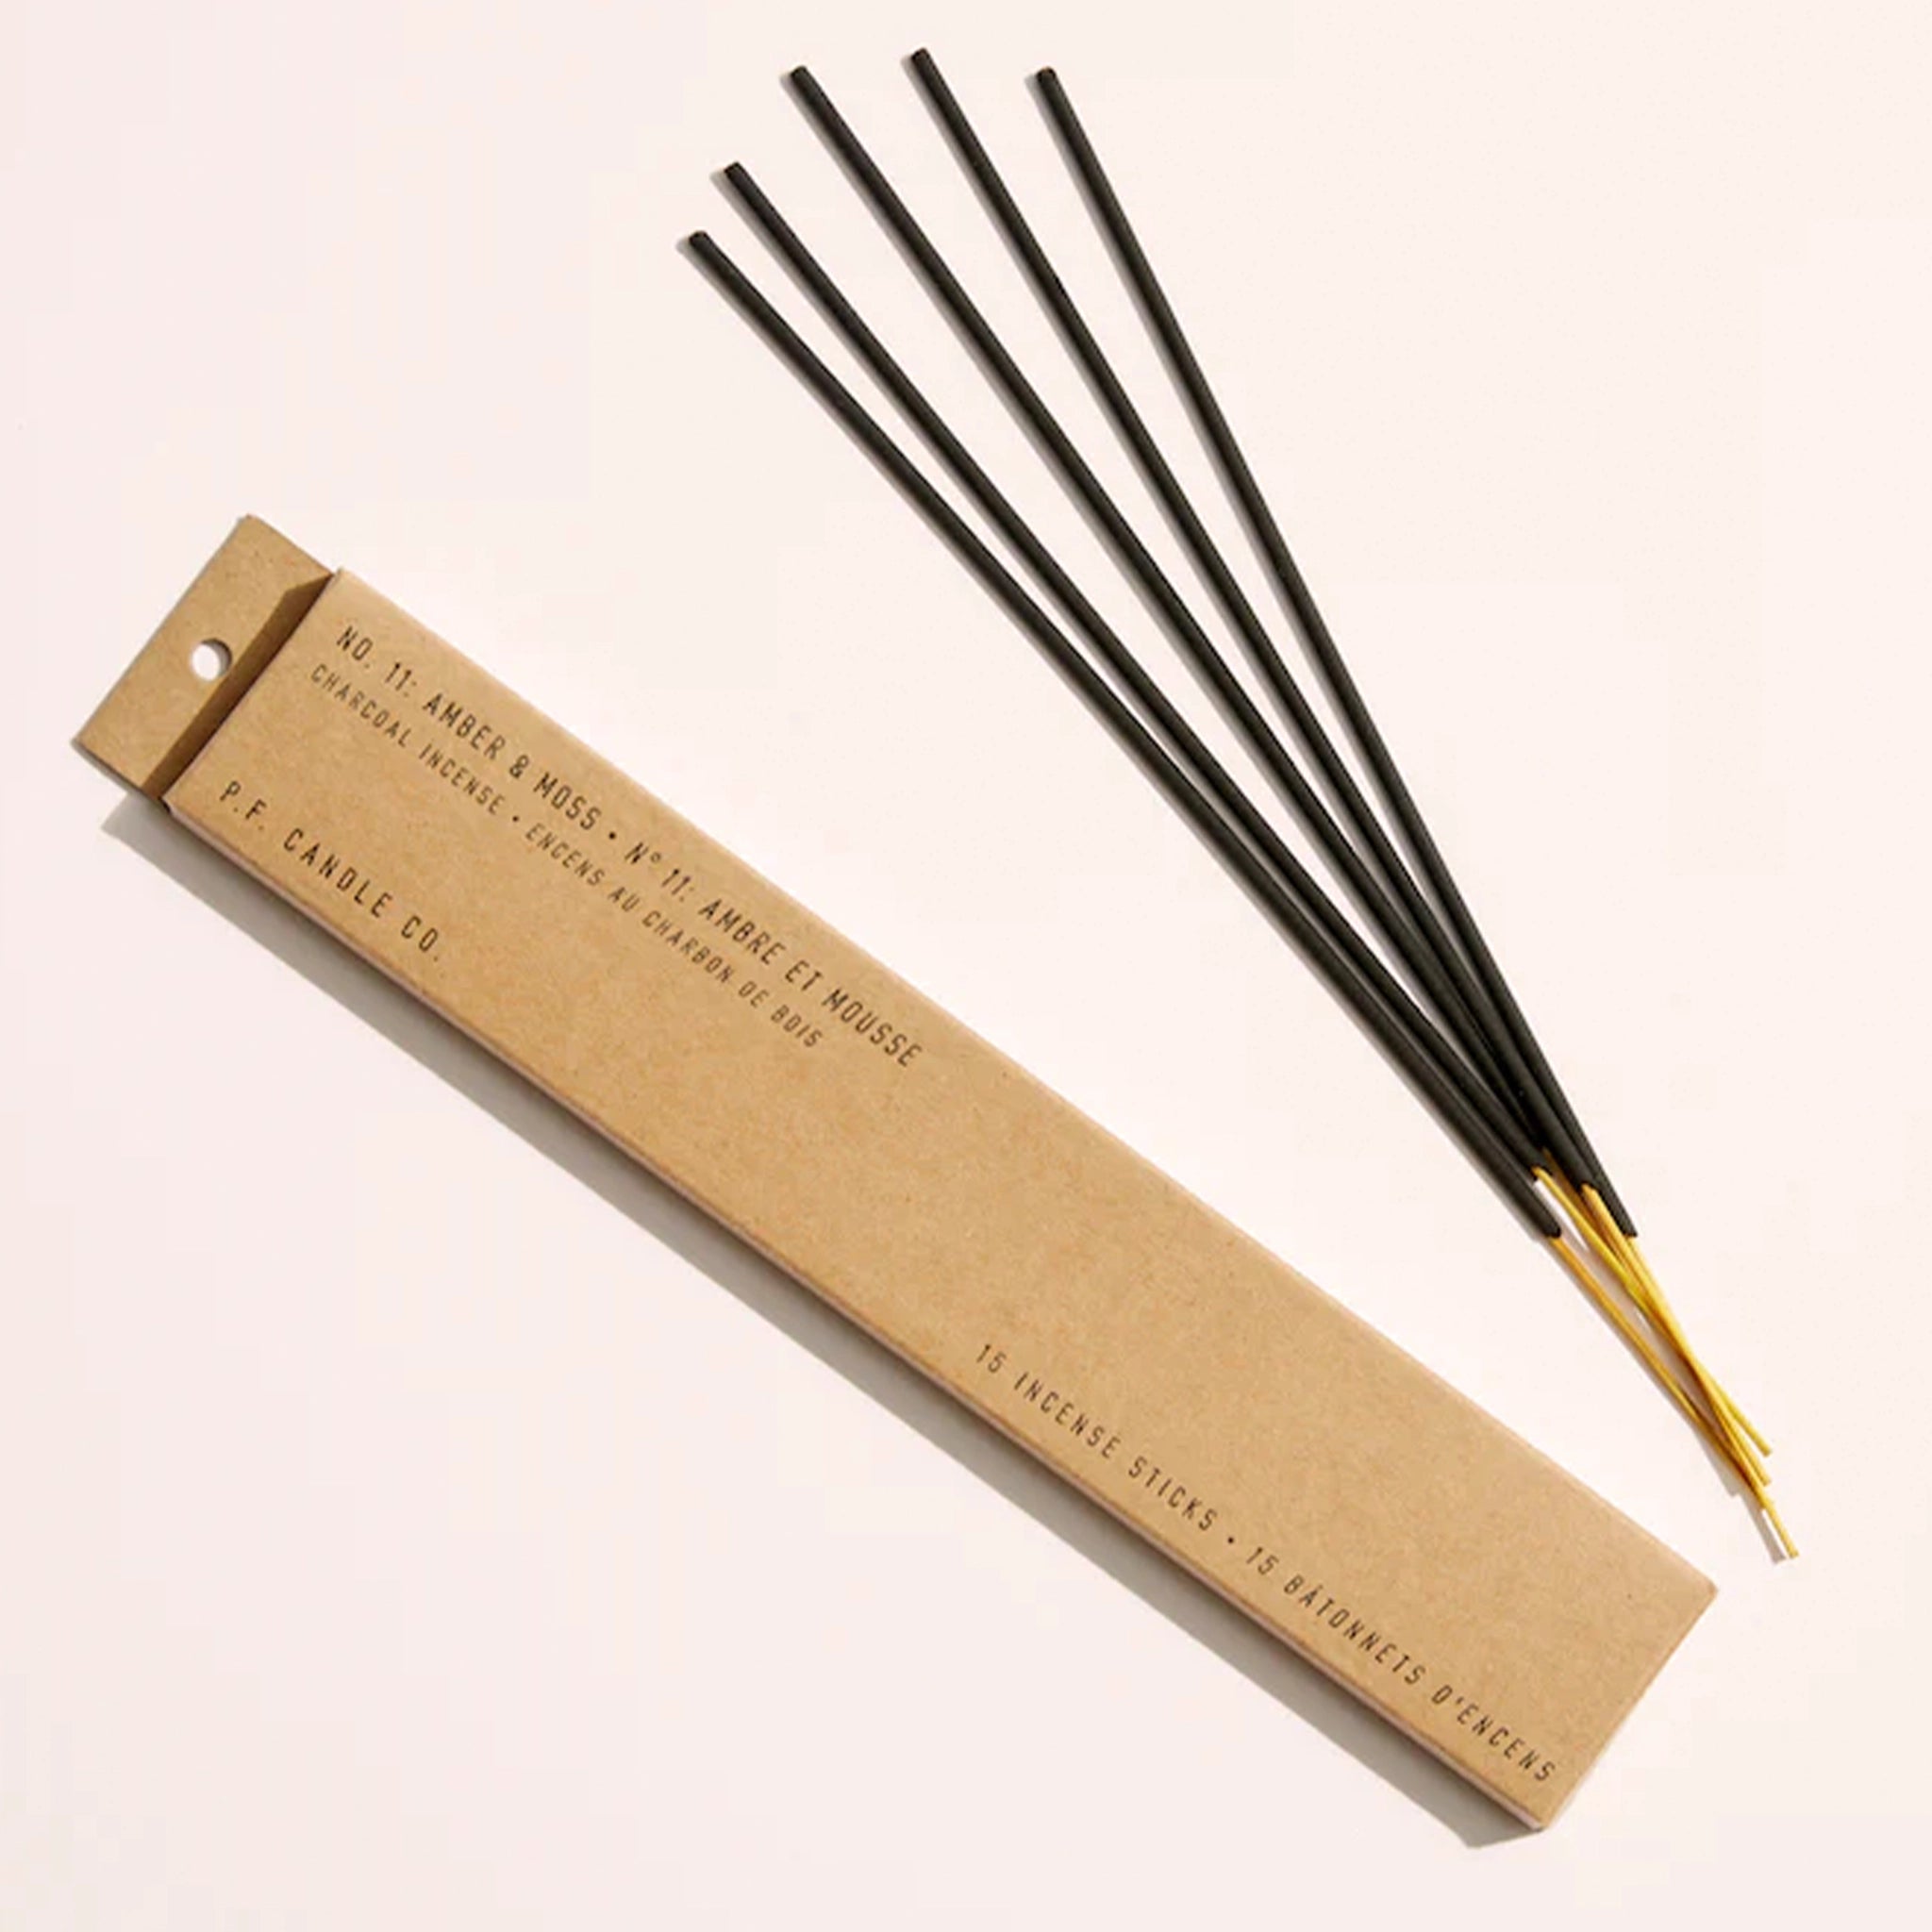 A cardboard package with 5 incense sticks with black ties and exposed natural wood ends along with black text on the box that reads, &quot;Amber &amp; Moss Charcoal Incense&quot;.